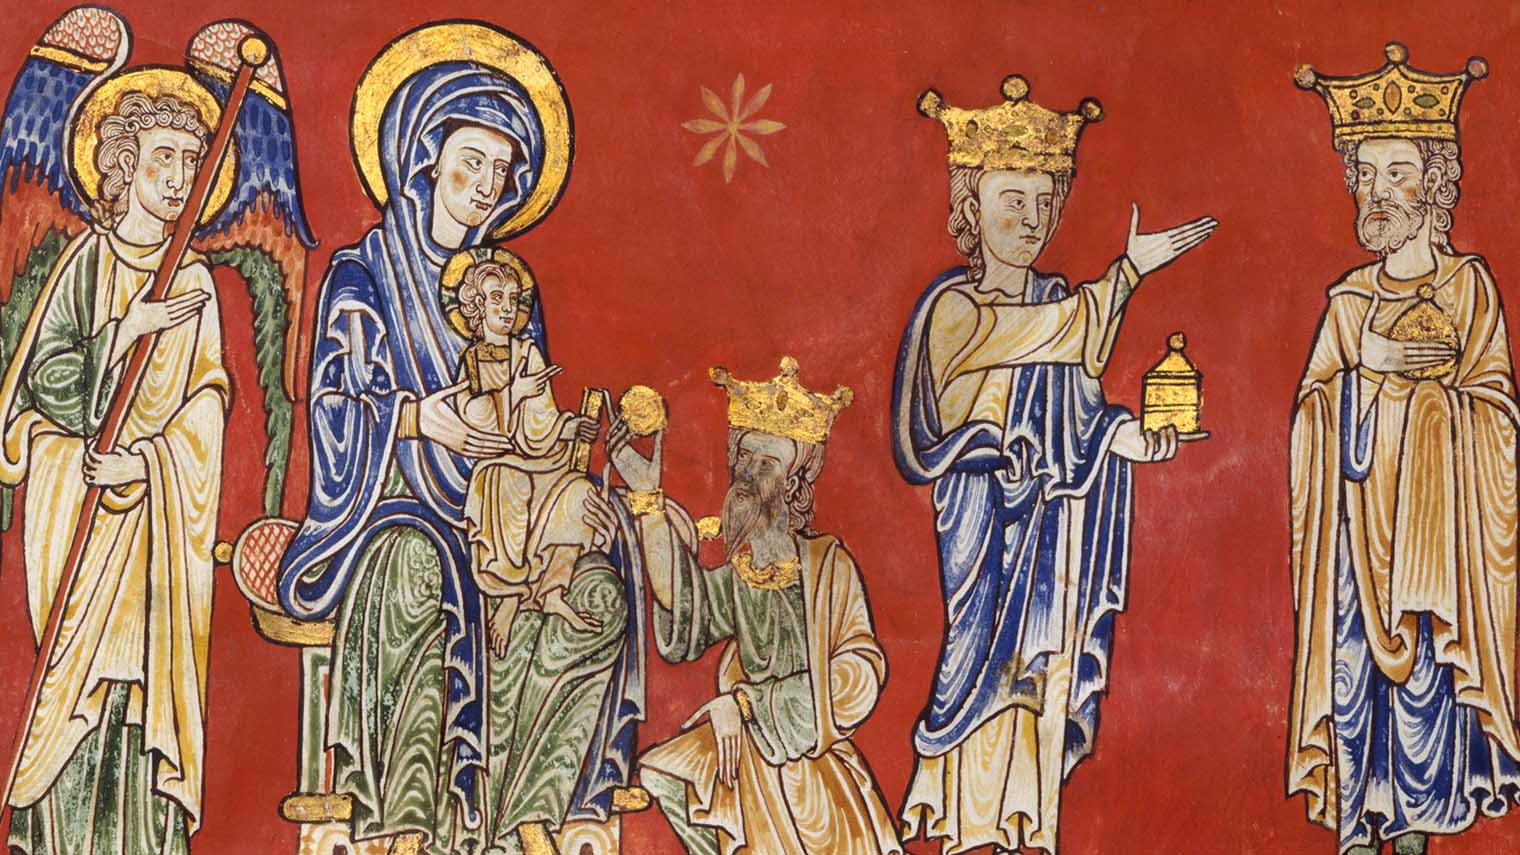 Illustration of the magi presenting gifts to Mary and Jesus from an Austrian manuscript